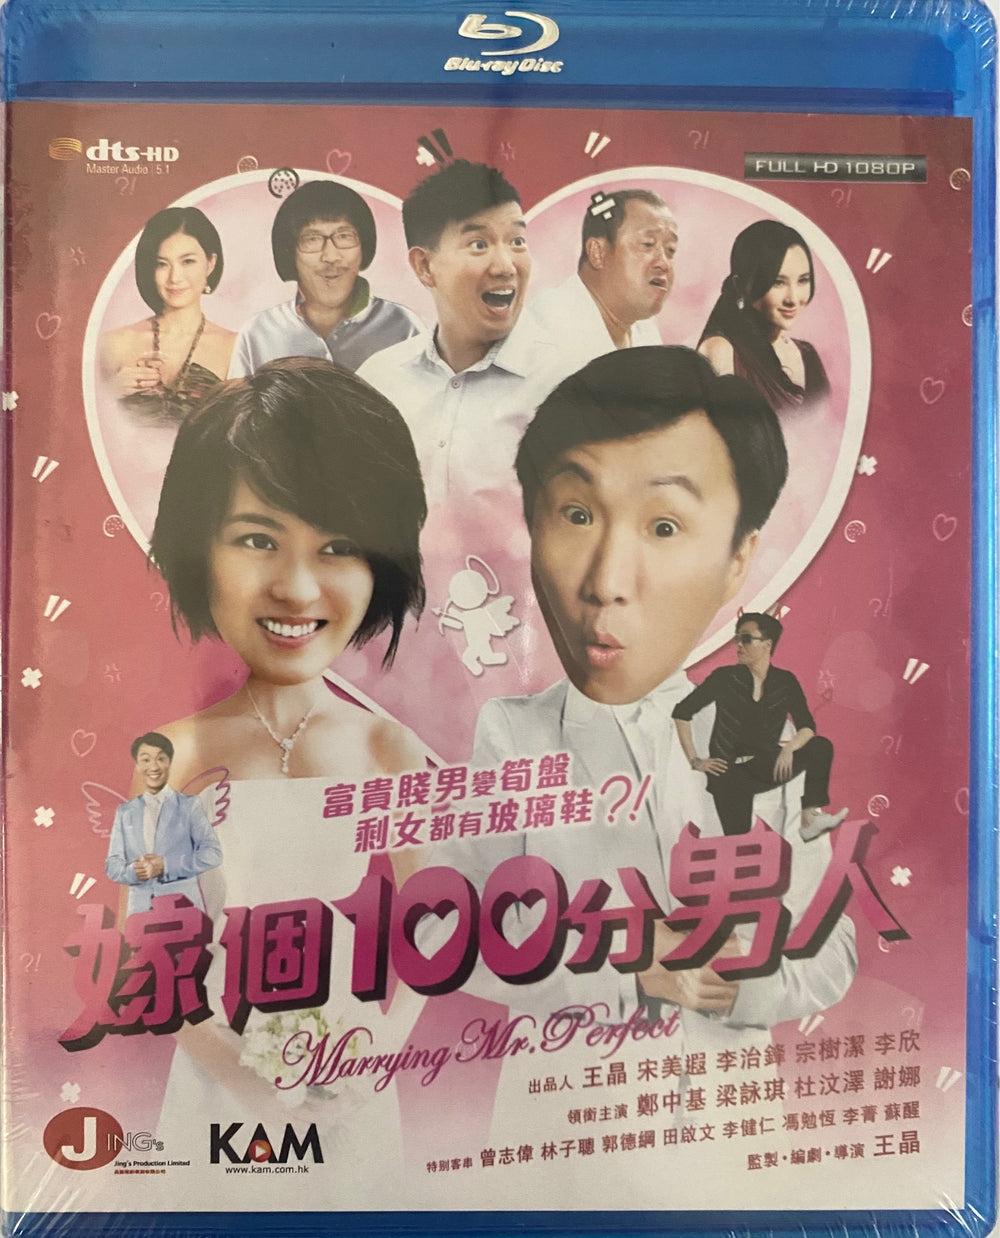 Marrying Mr. Perfect 嫁過100分男人 2012 (Hong Kong Movie) BLU-RAY with English Sub (Region A)